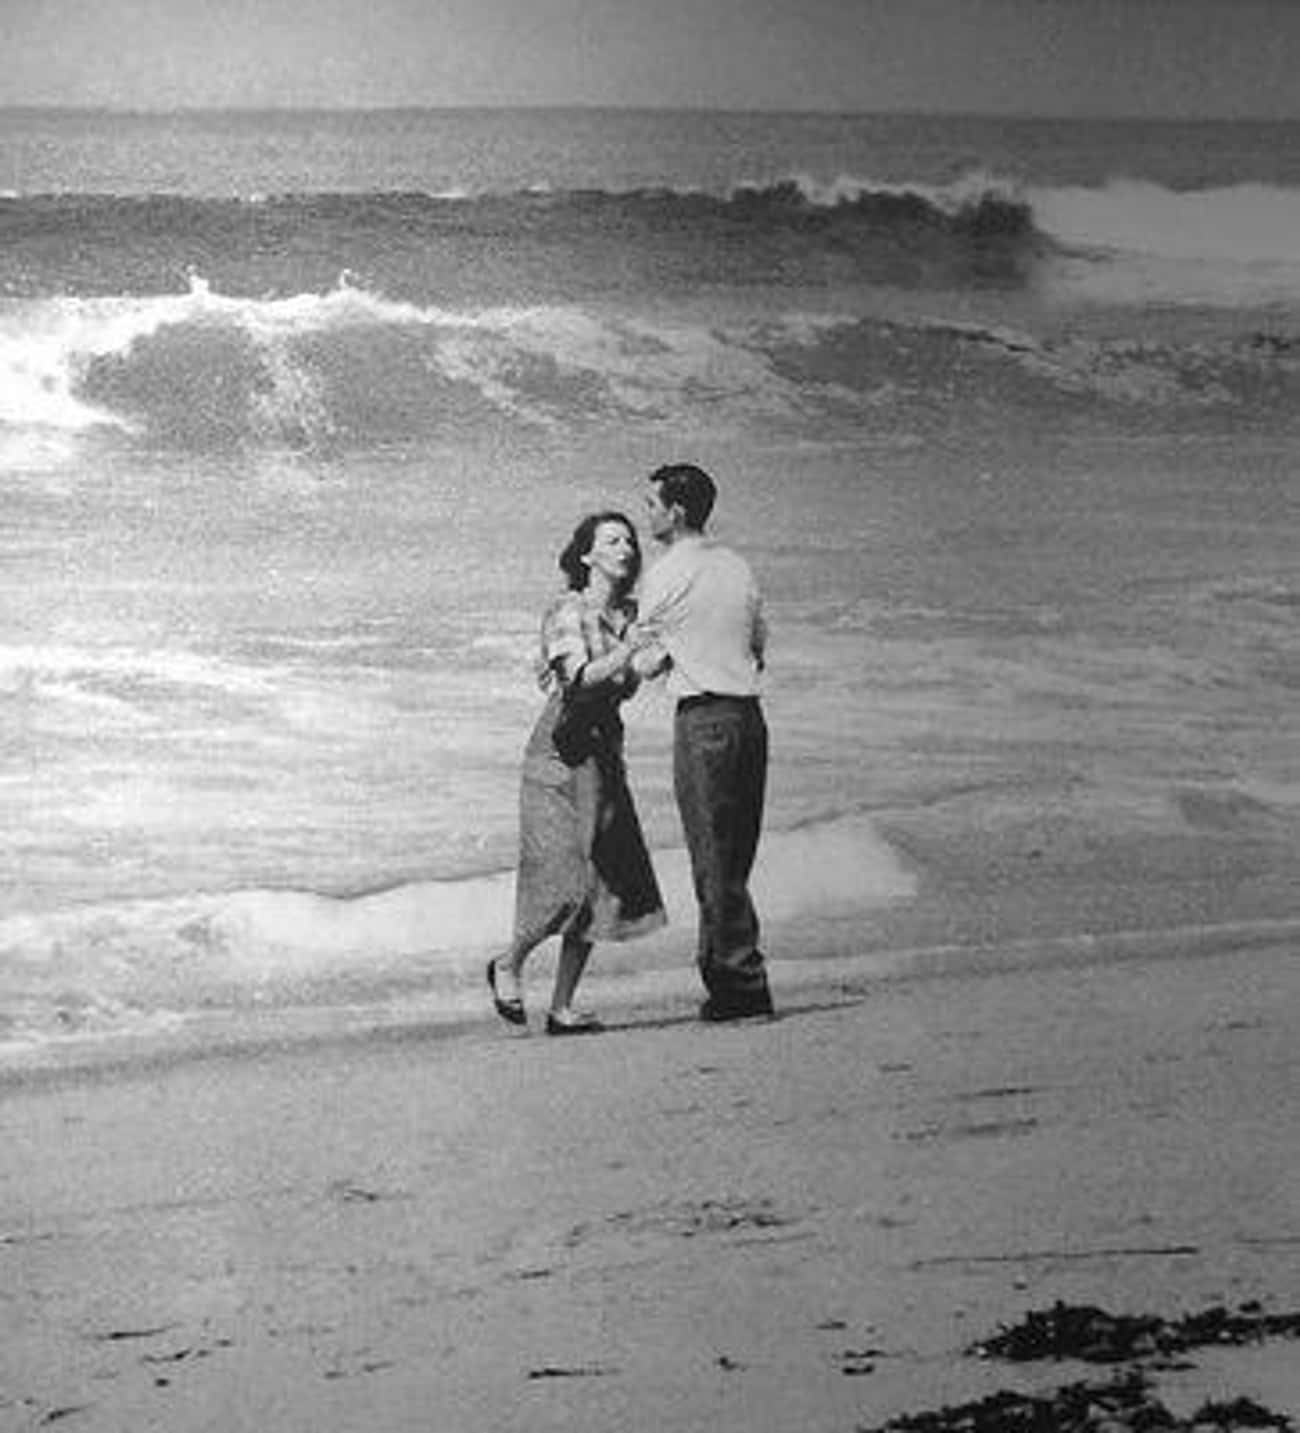 1955: 'Tragedy By The Sea'